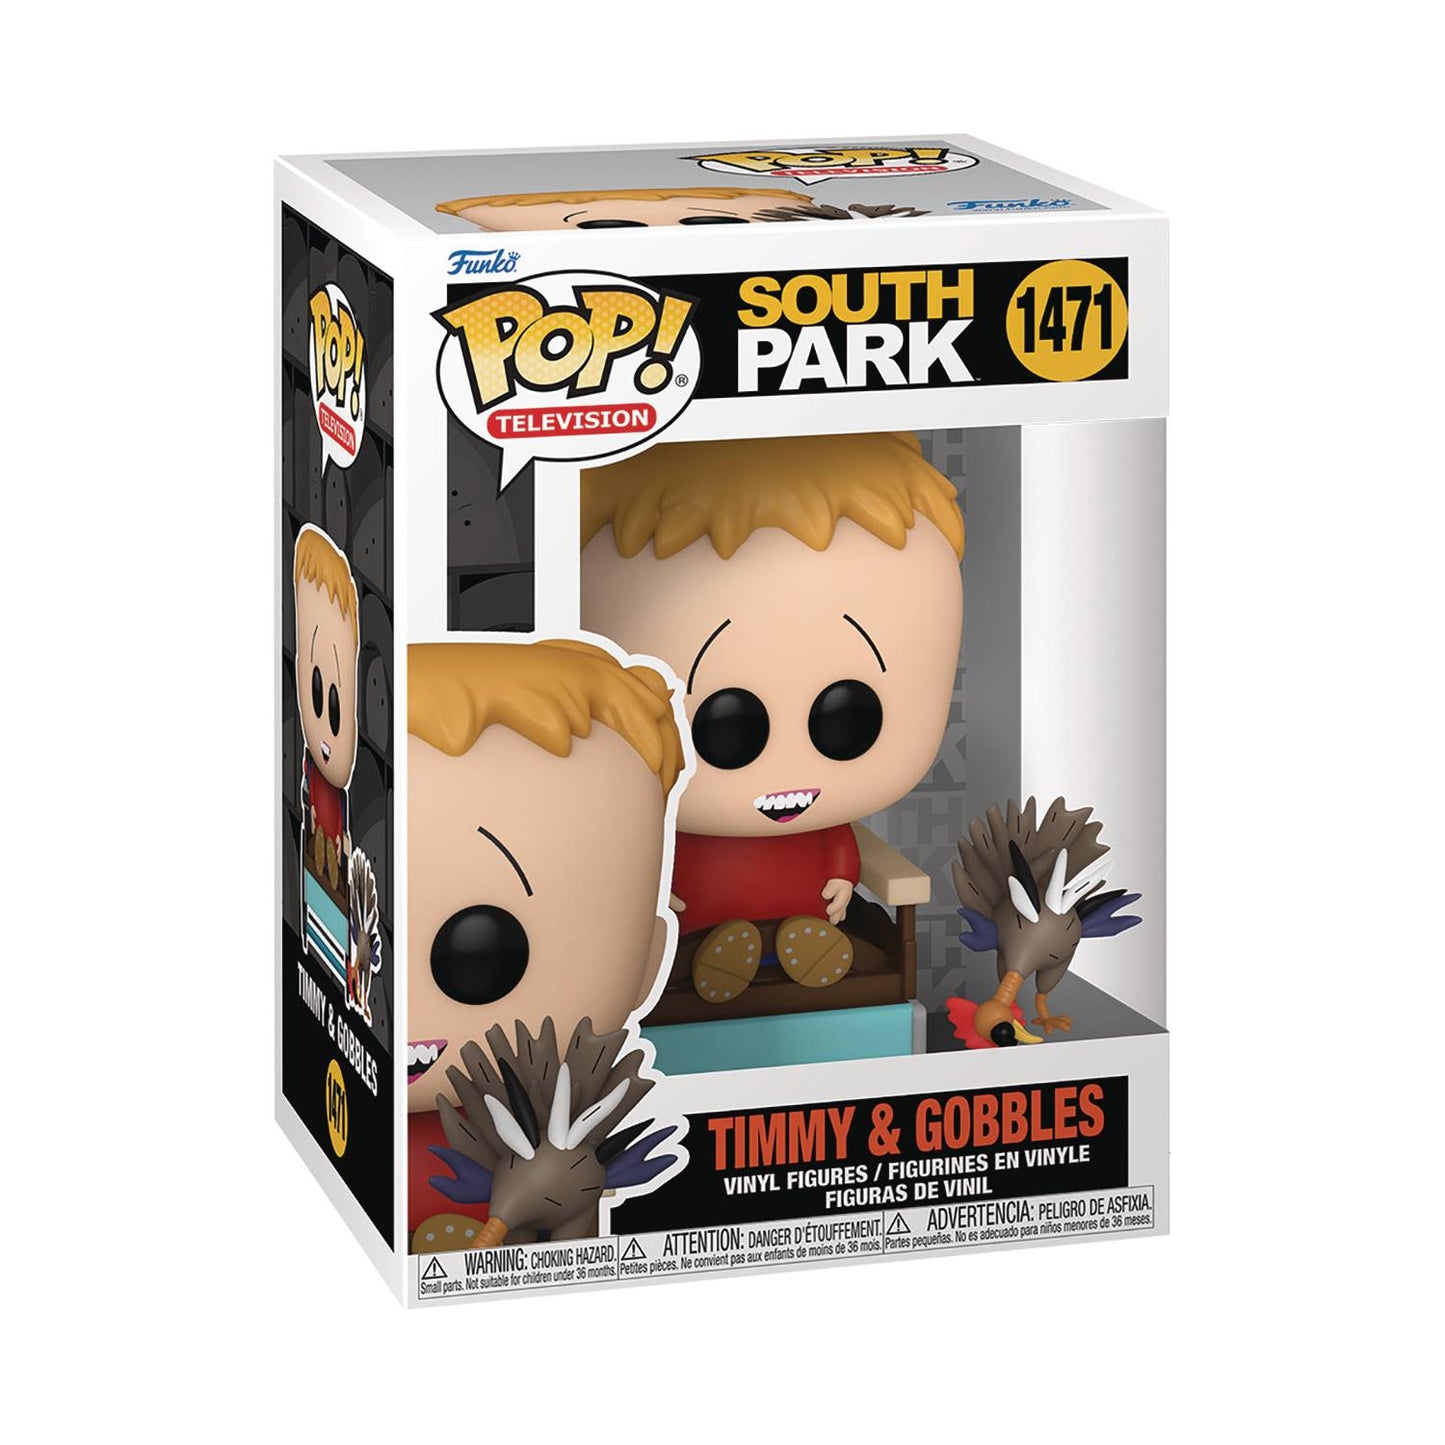 Funko Television Pop!: South Park - Timmy w/ Gobbles #1471